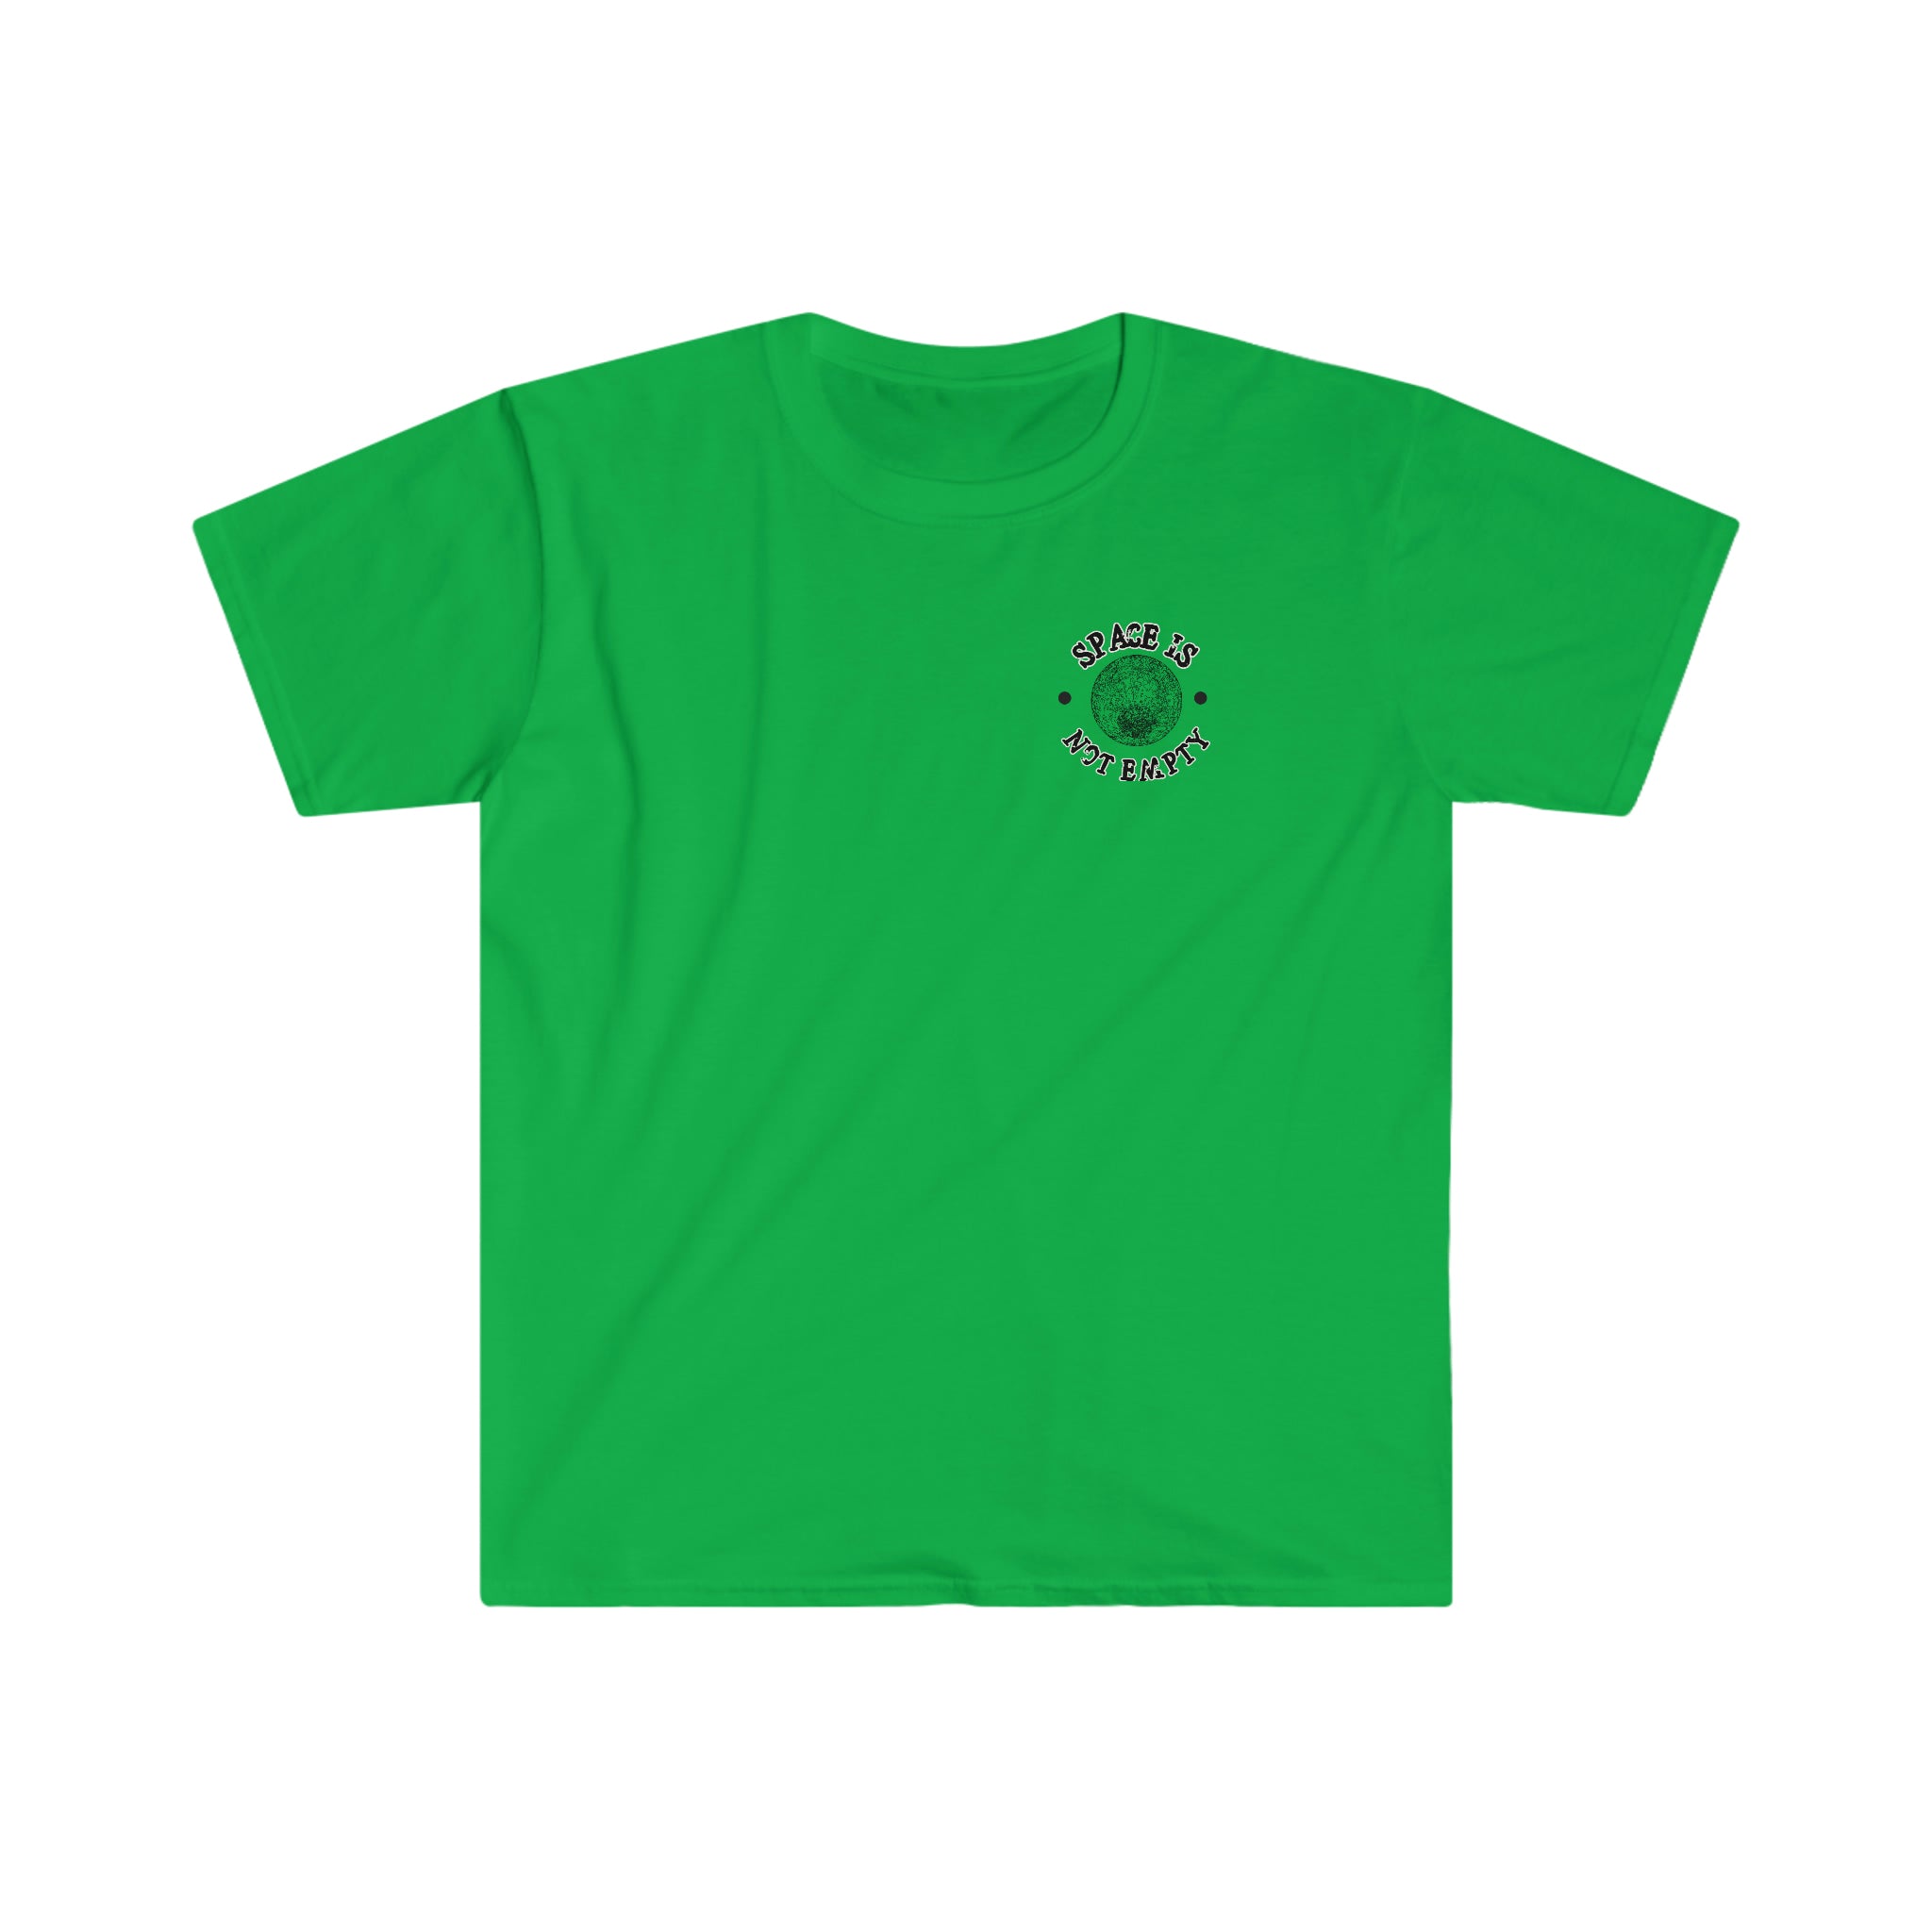 A Deep Deep Space T-Shirt, comfortable fit, made of cotton material with a green flower on it.